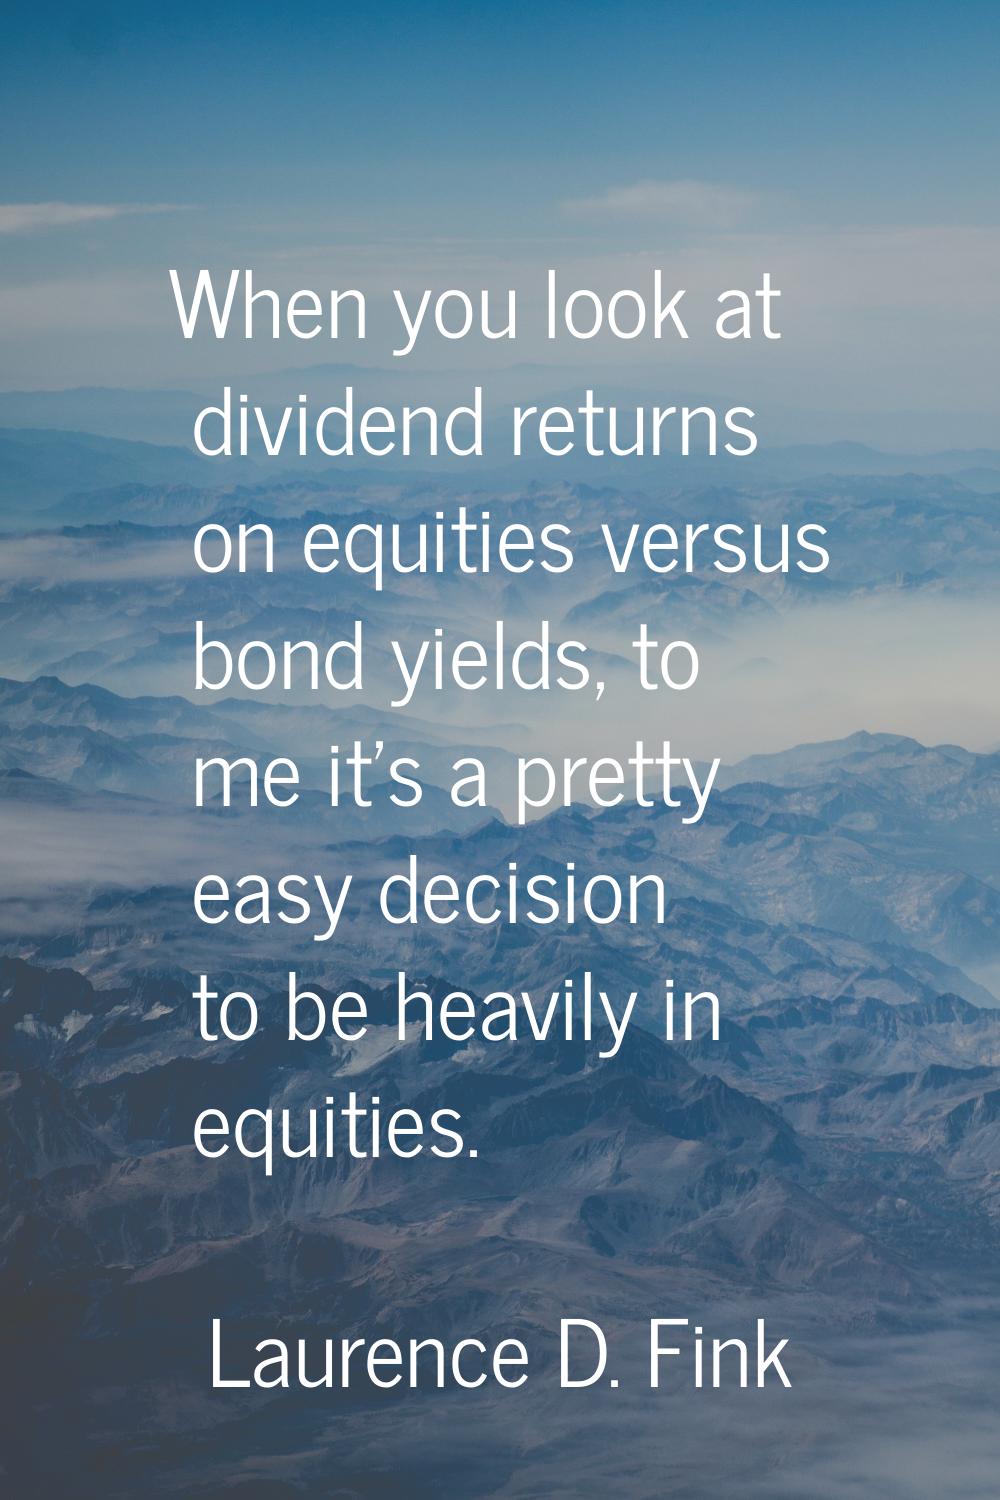 When you look at dividend returns on equities versus bond yields, to me it's a pretty easy decision